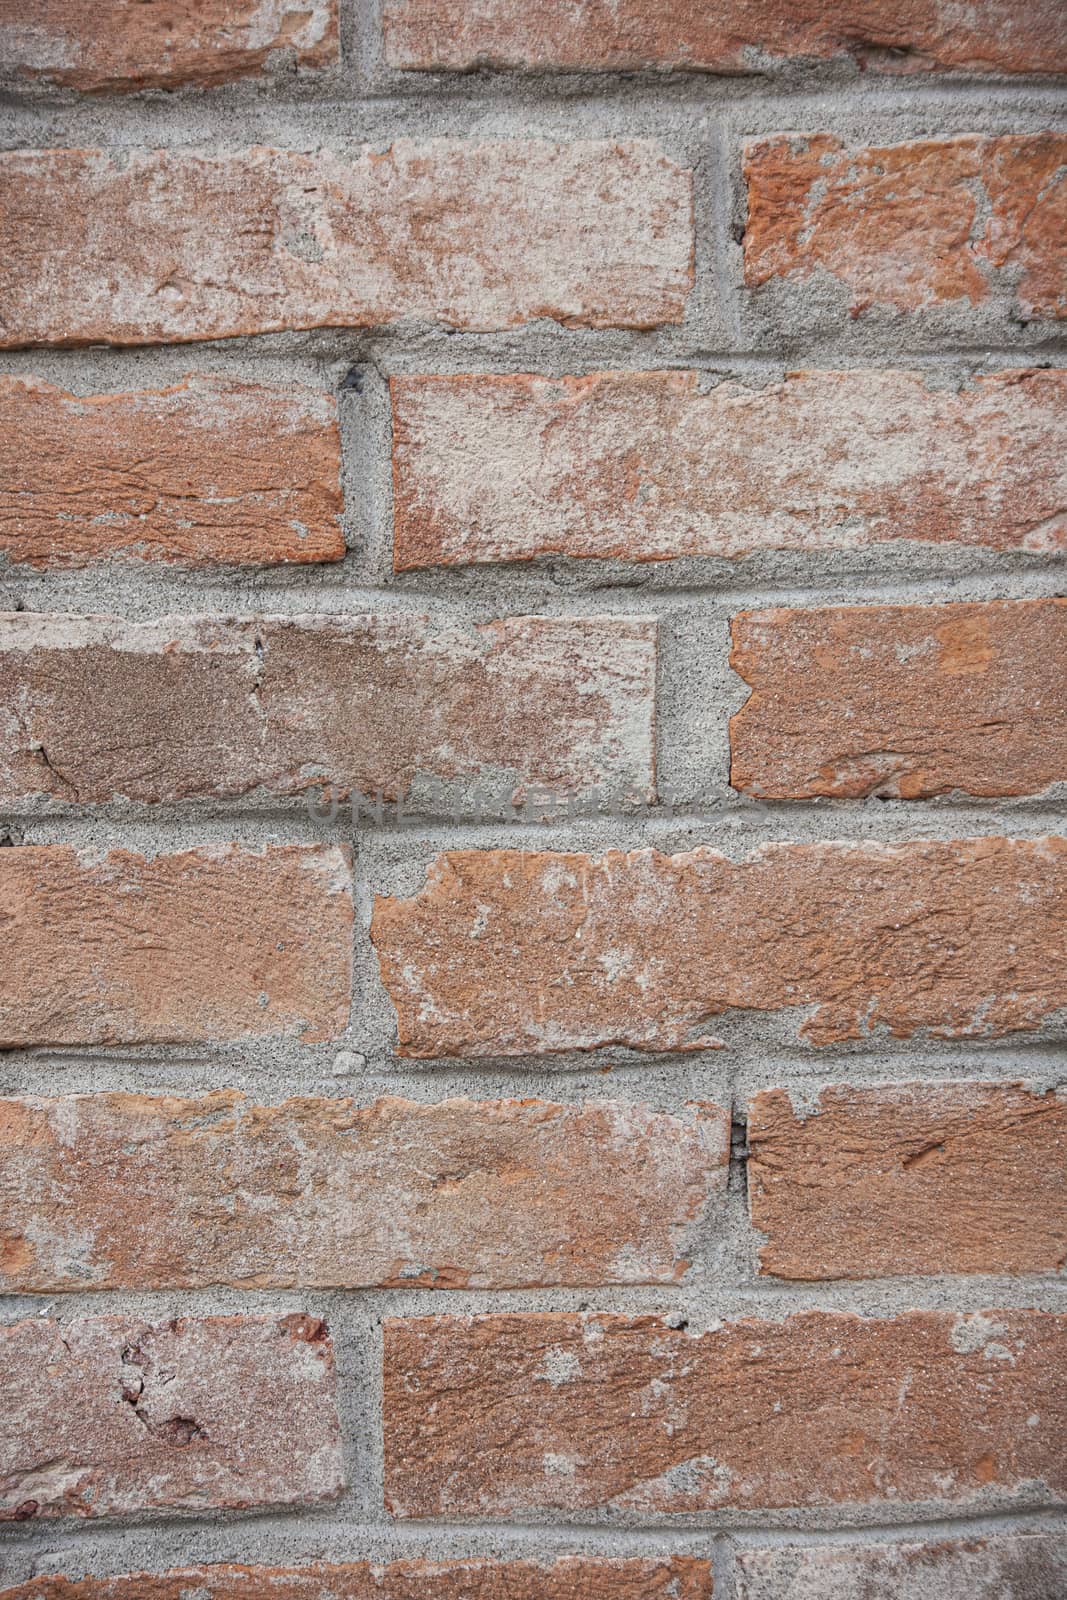 Brick texture detail, image in high resolution and with high level of detail